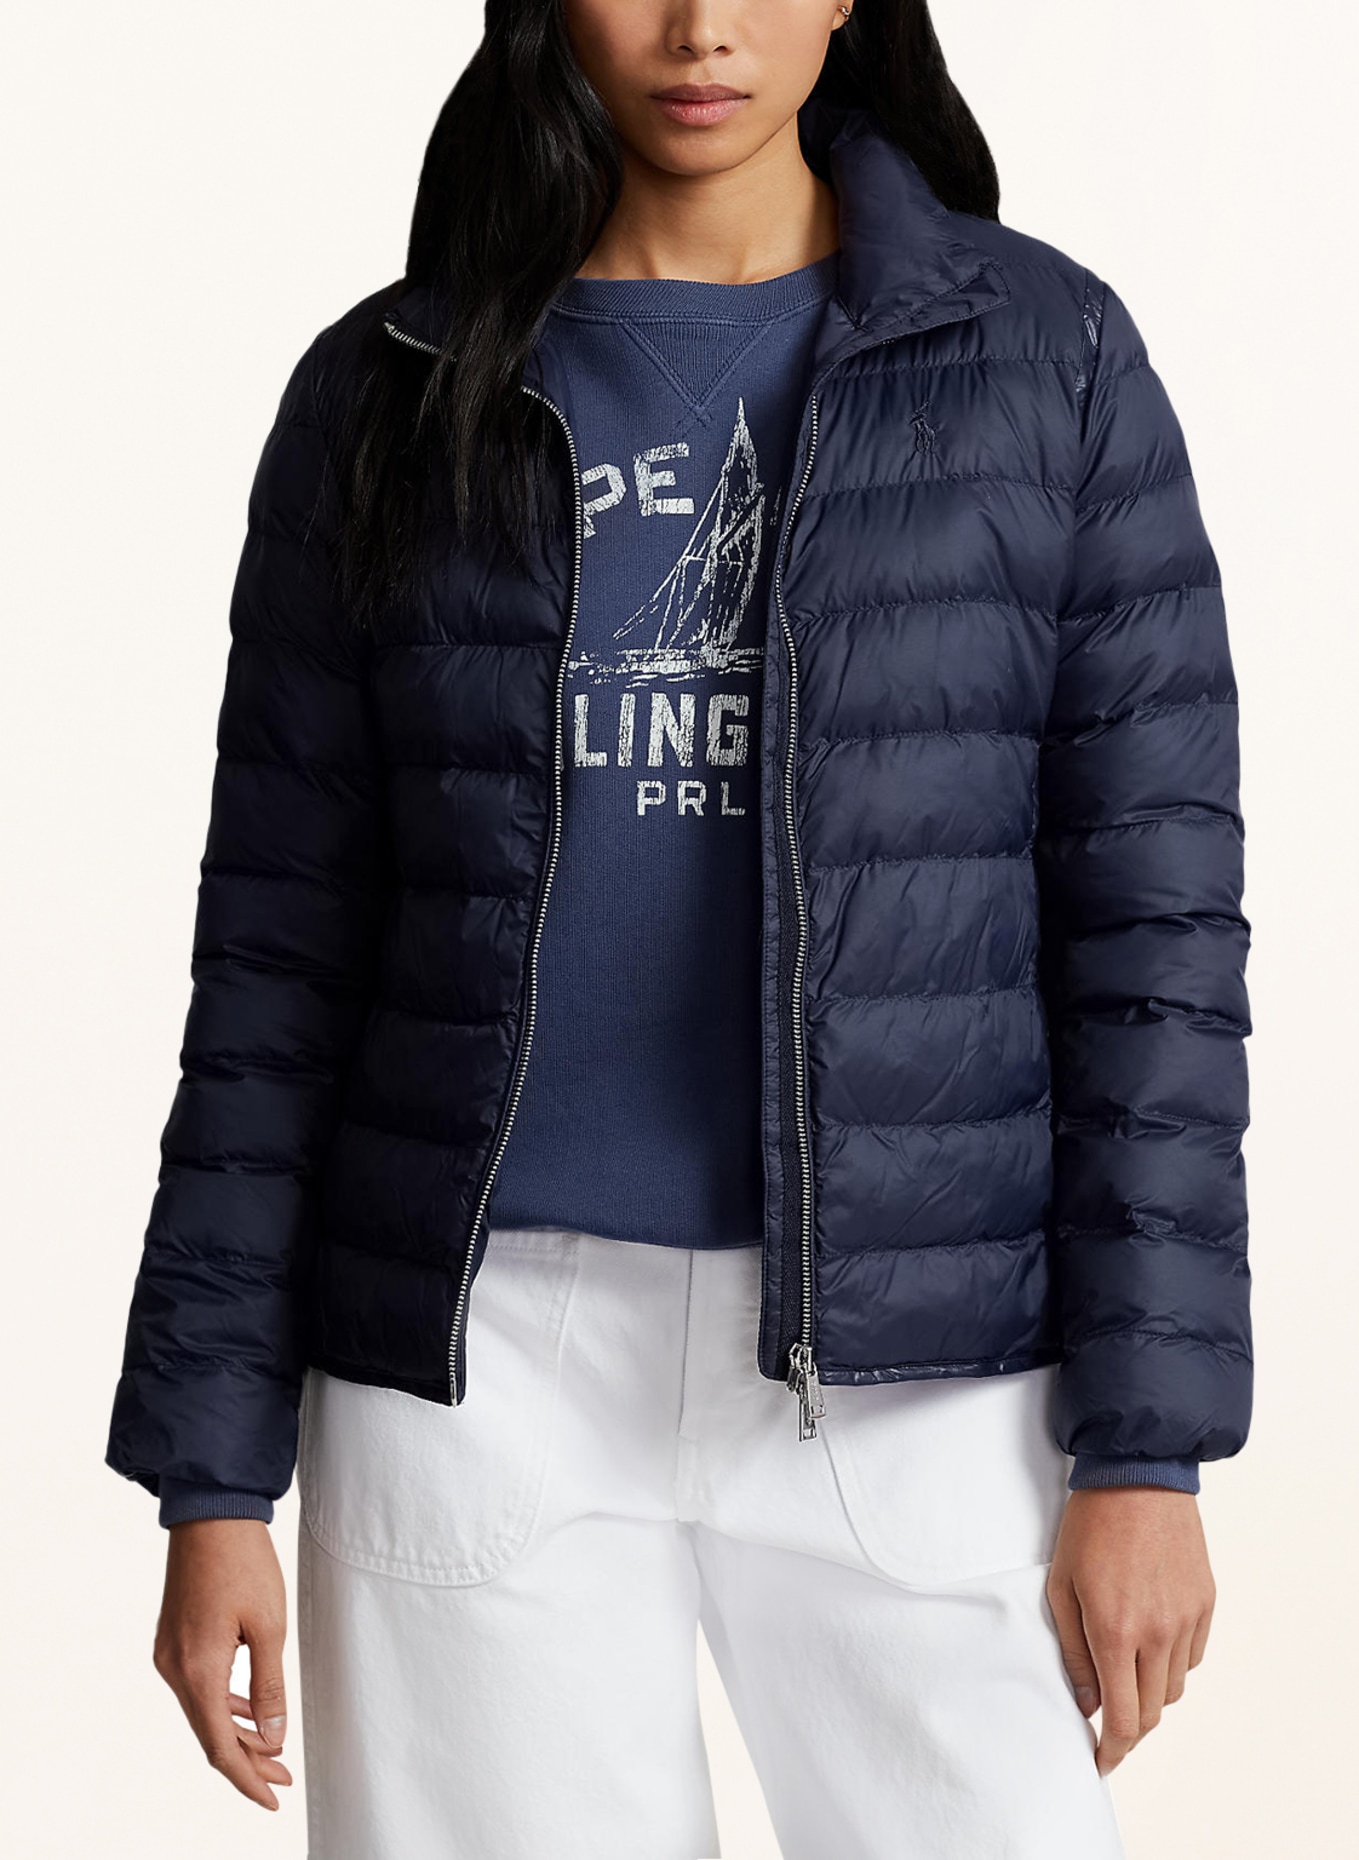 POLO RALPH LAUREN Quilted jacket, Color: DARK BLUE (Image 4)